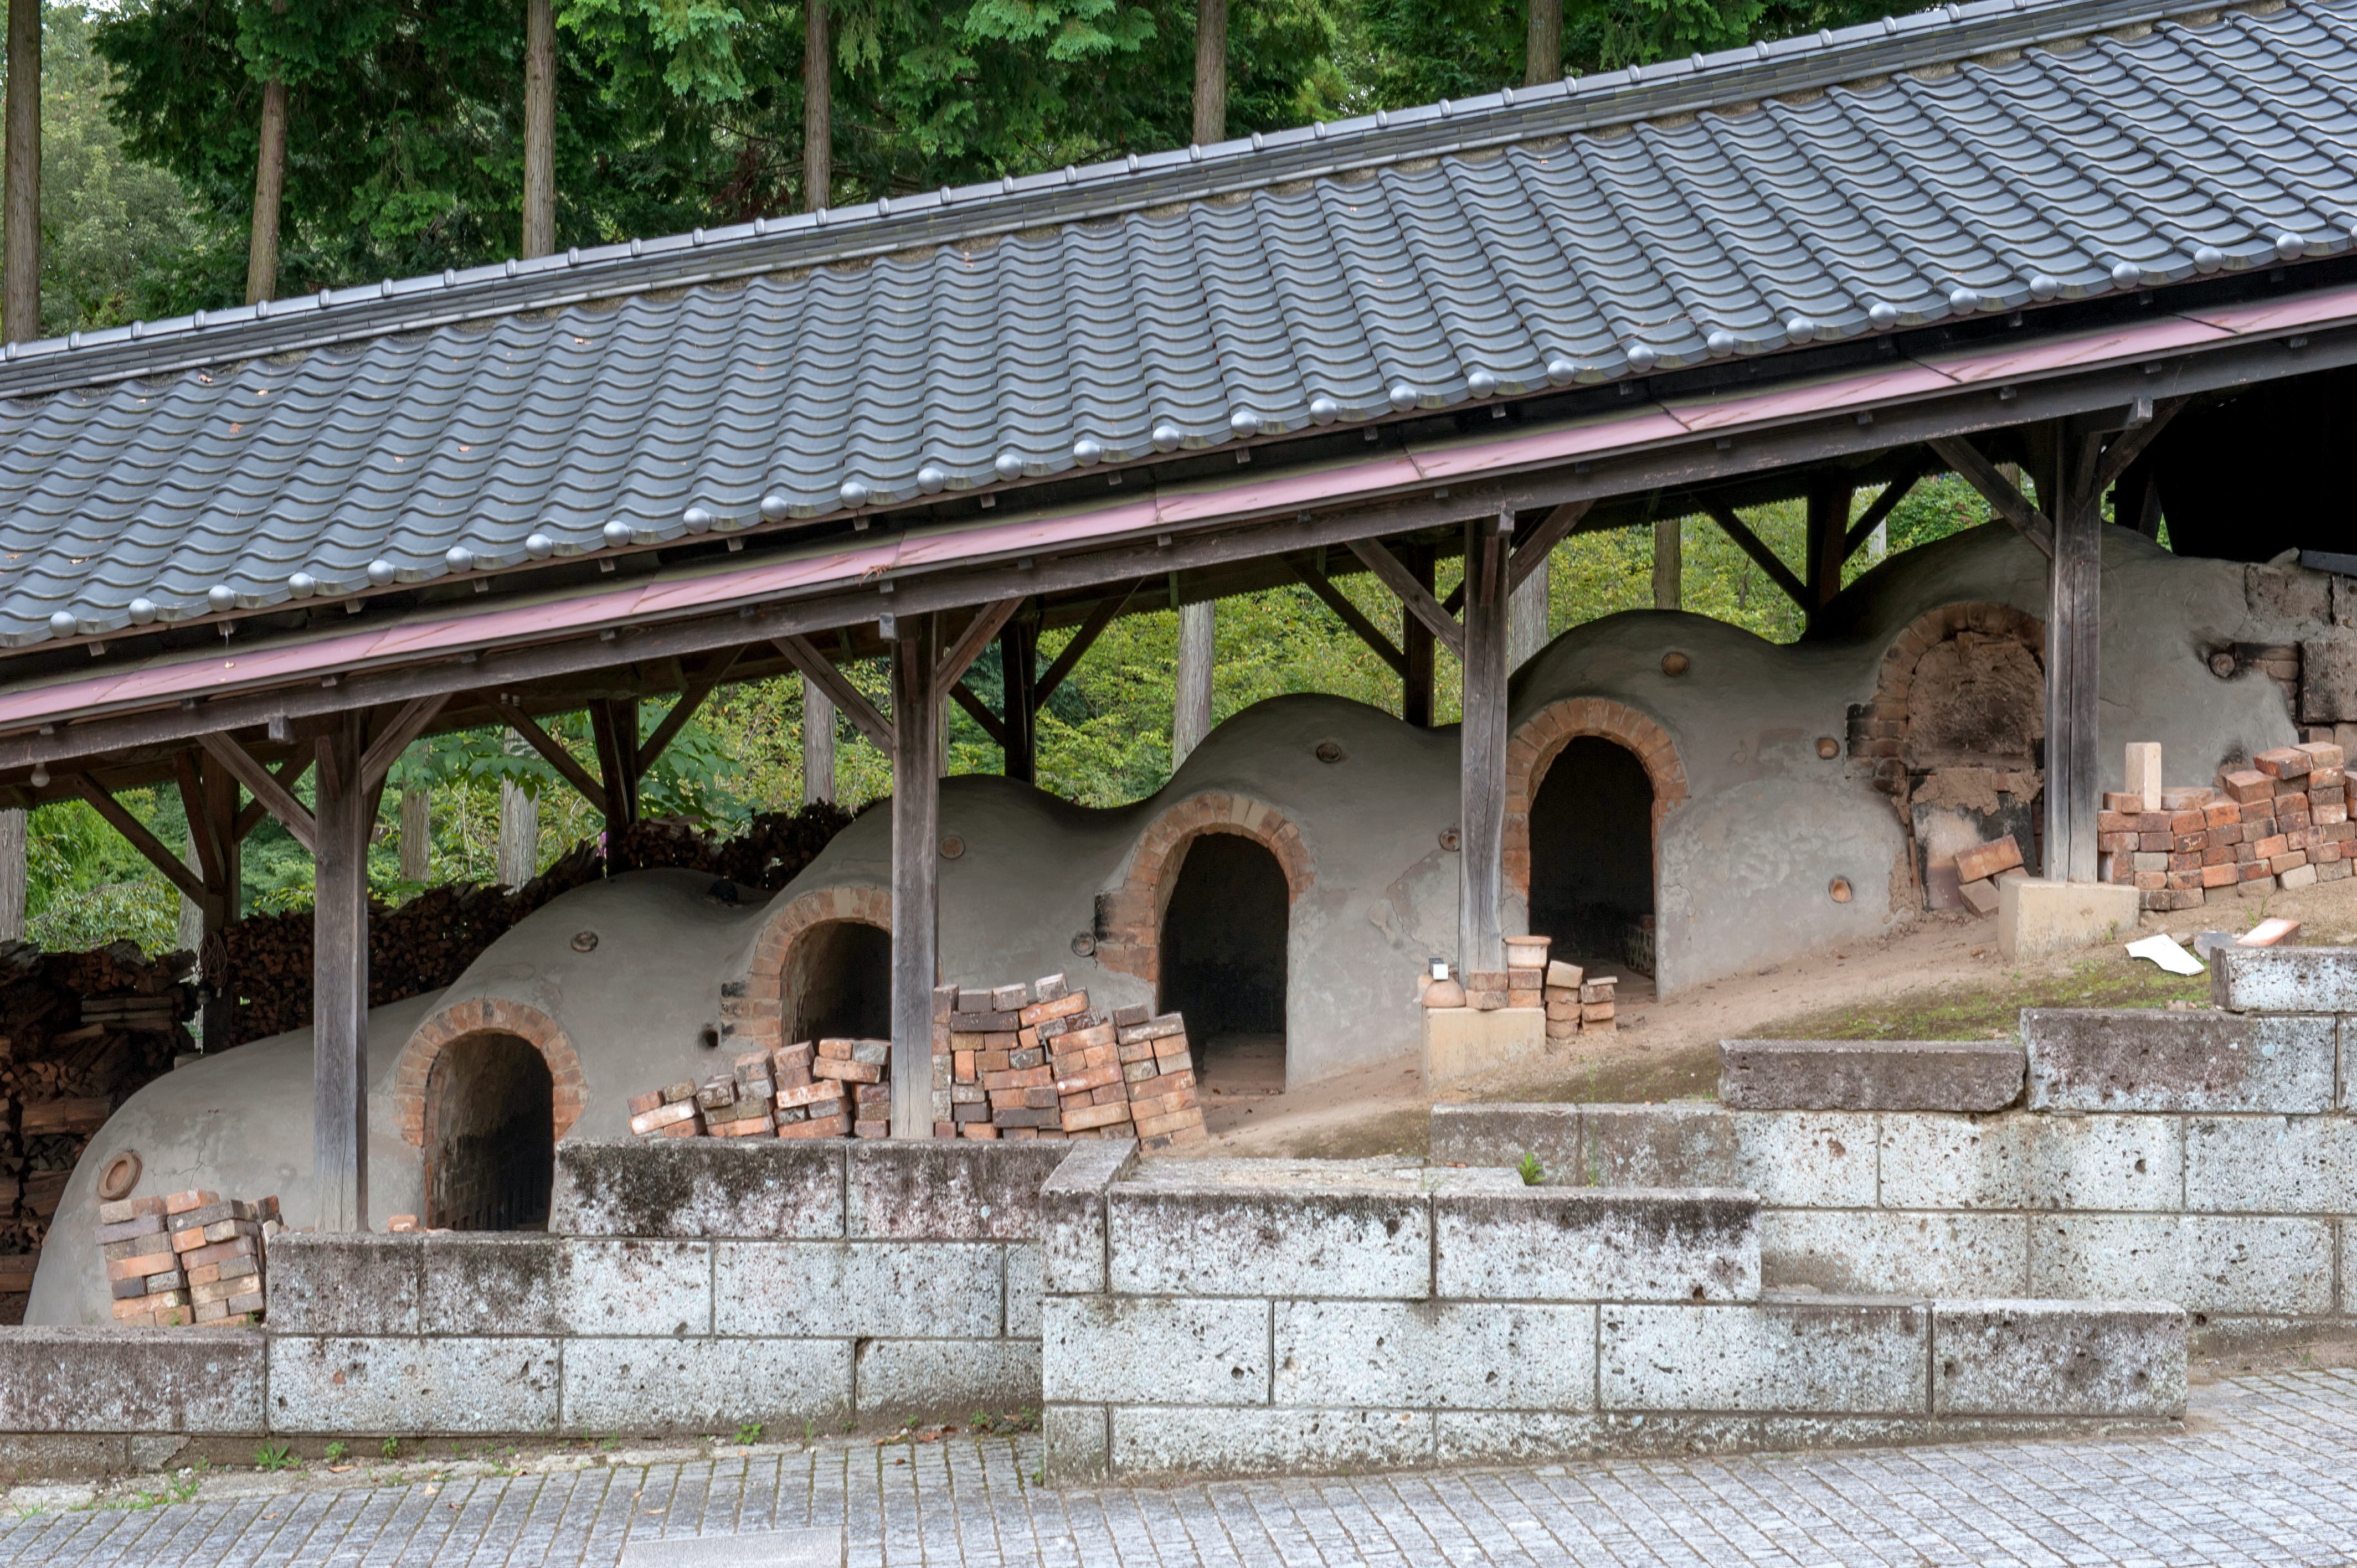 The renowned local potter Shoji Hamada built this climbing kiln in the grounds of his home. | STEPHEN MANSFIELD PHOTO